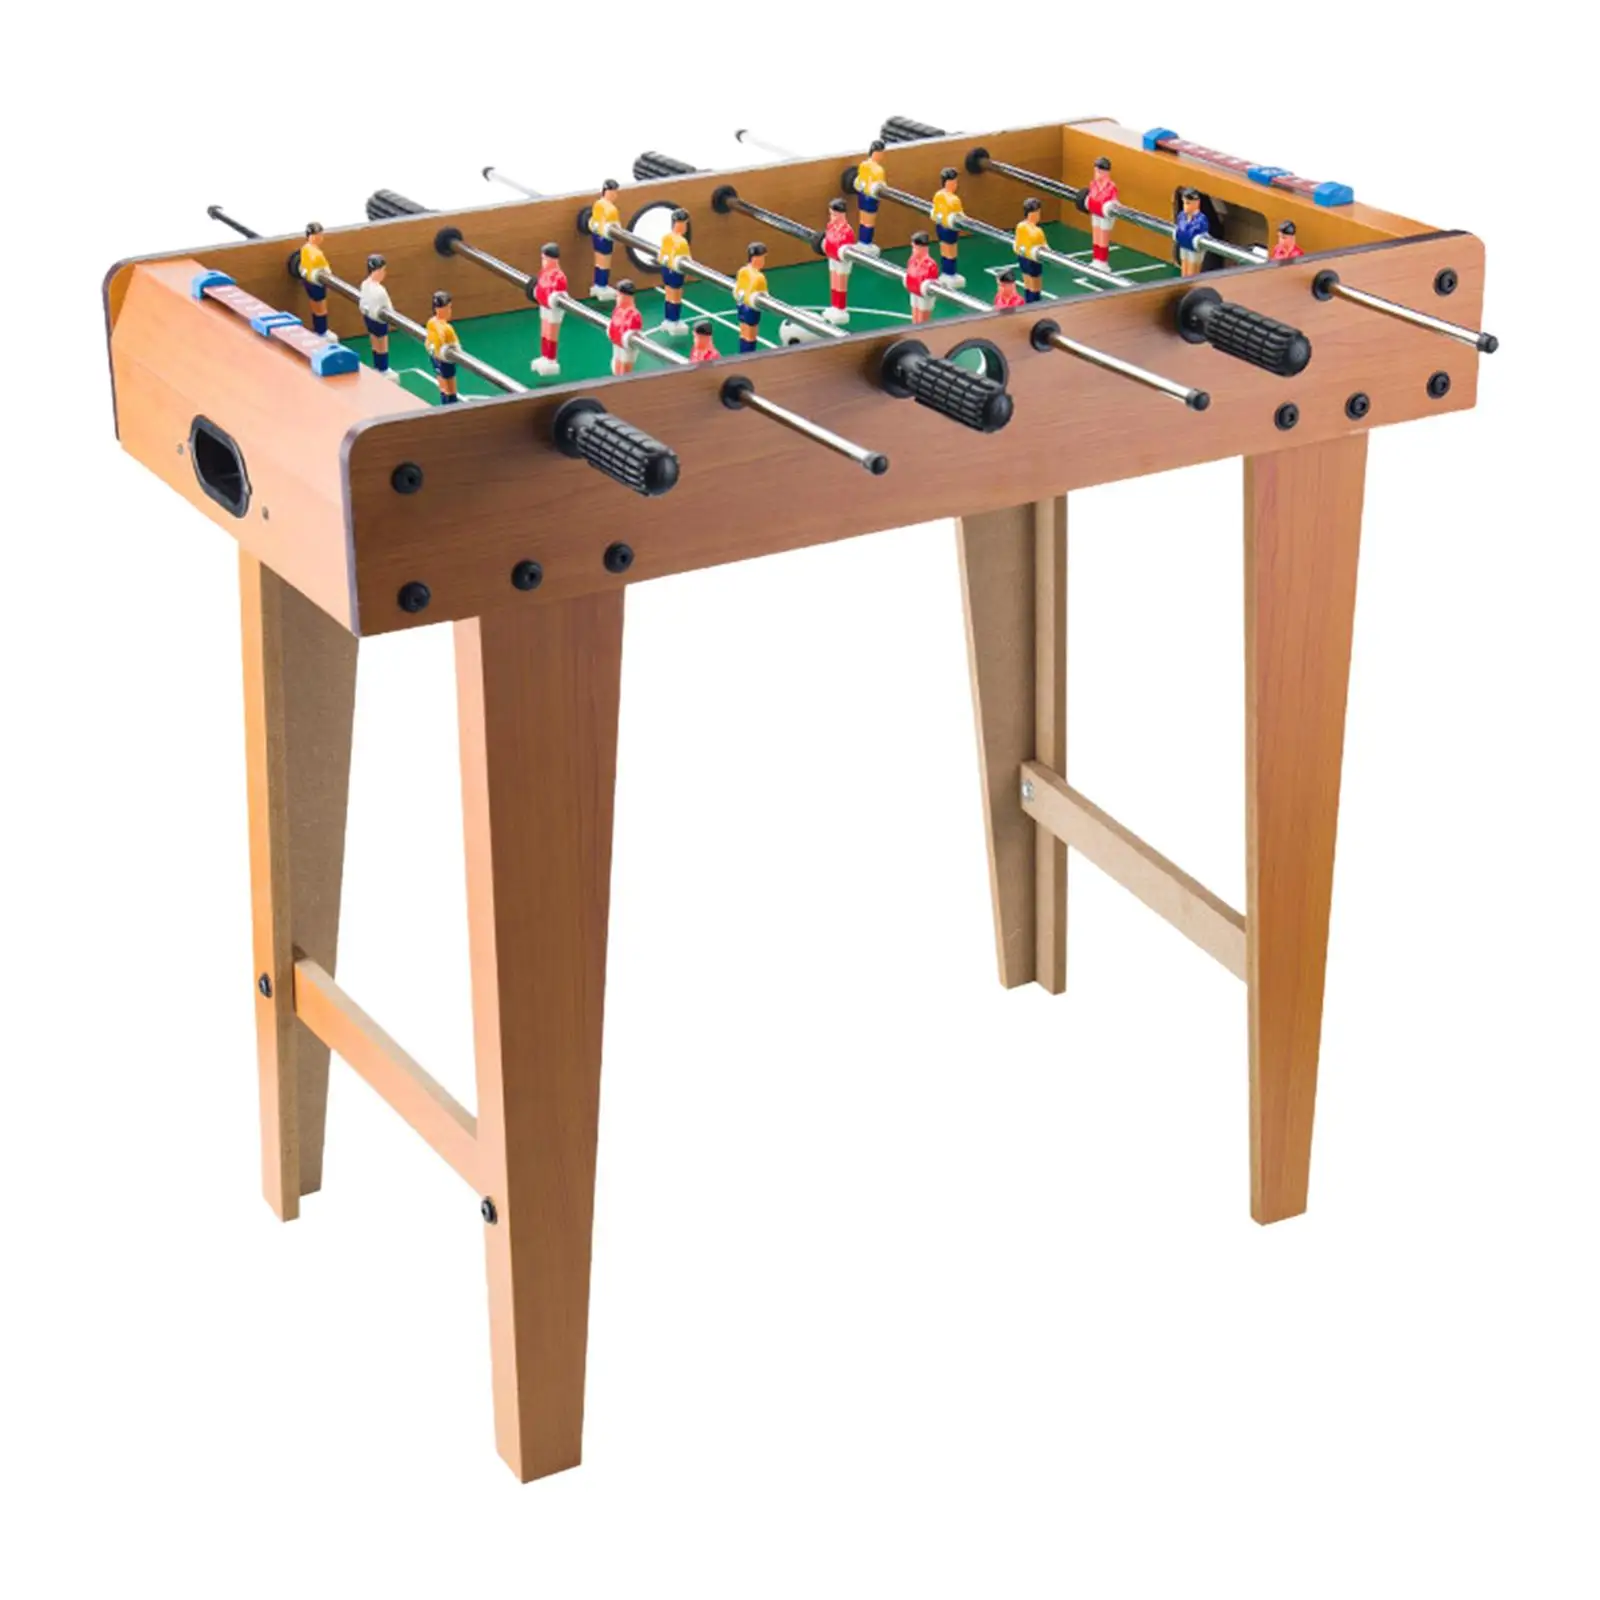 Portable Foosball Table Tabletop Football Game Parent Child Interactive Toy Sports Table Top Football Table for Adults Kids